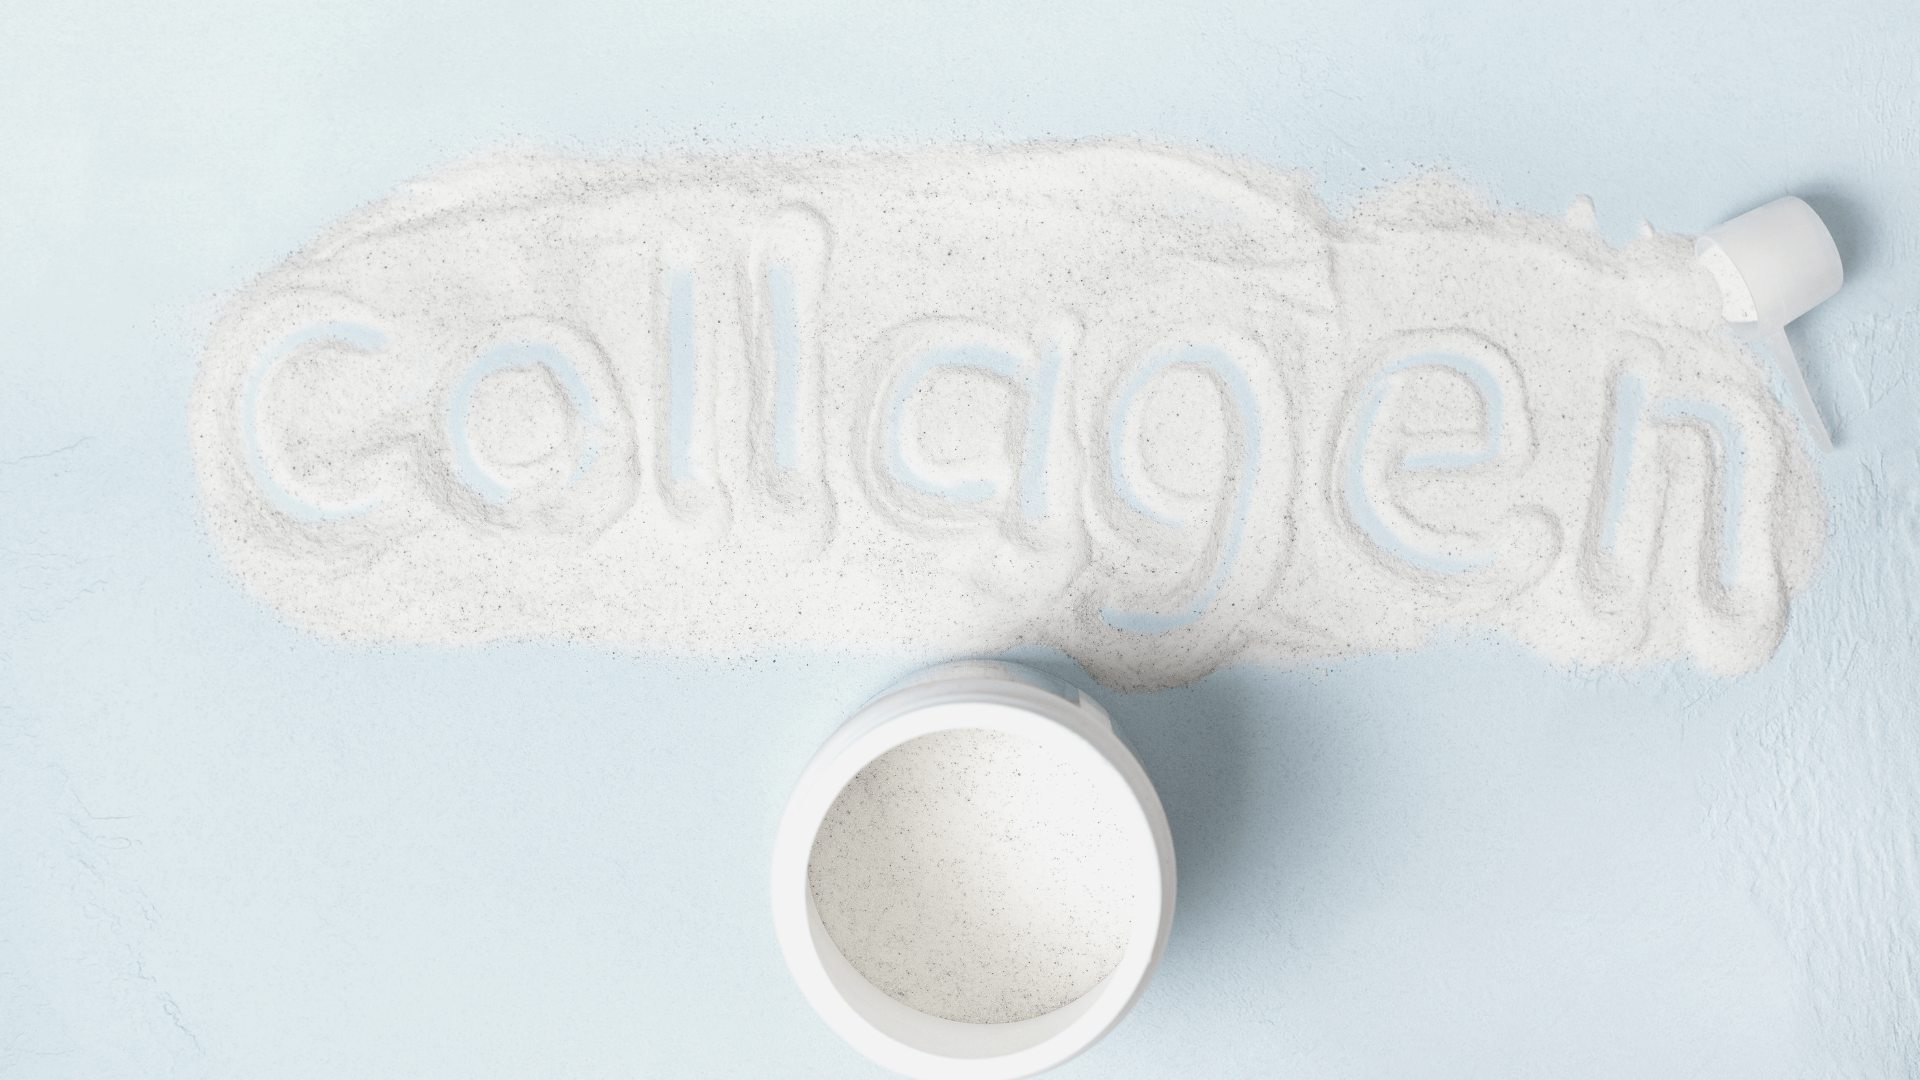 28 Simple Ways to Incorporate Collagen and Gelatin Into Your Diet